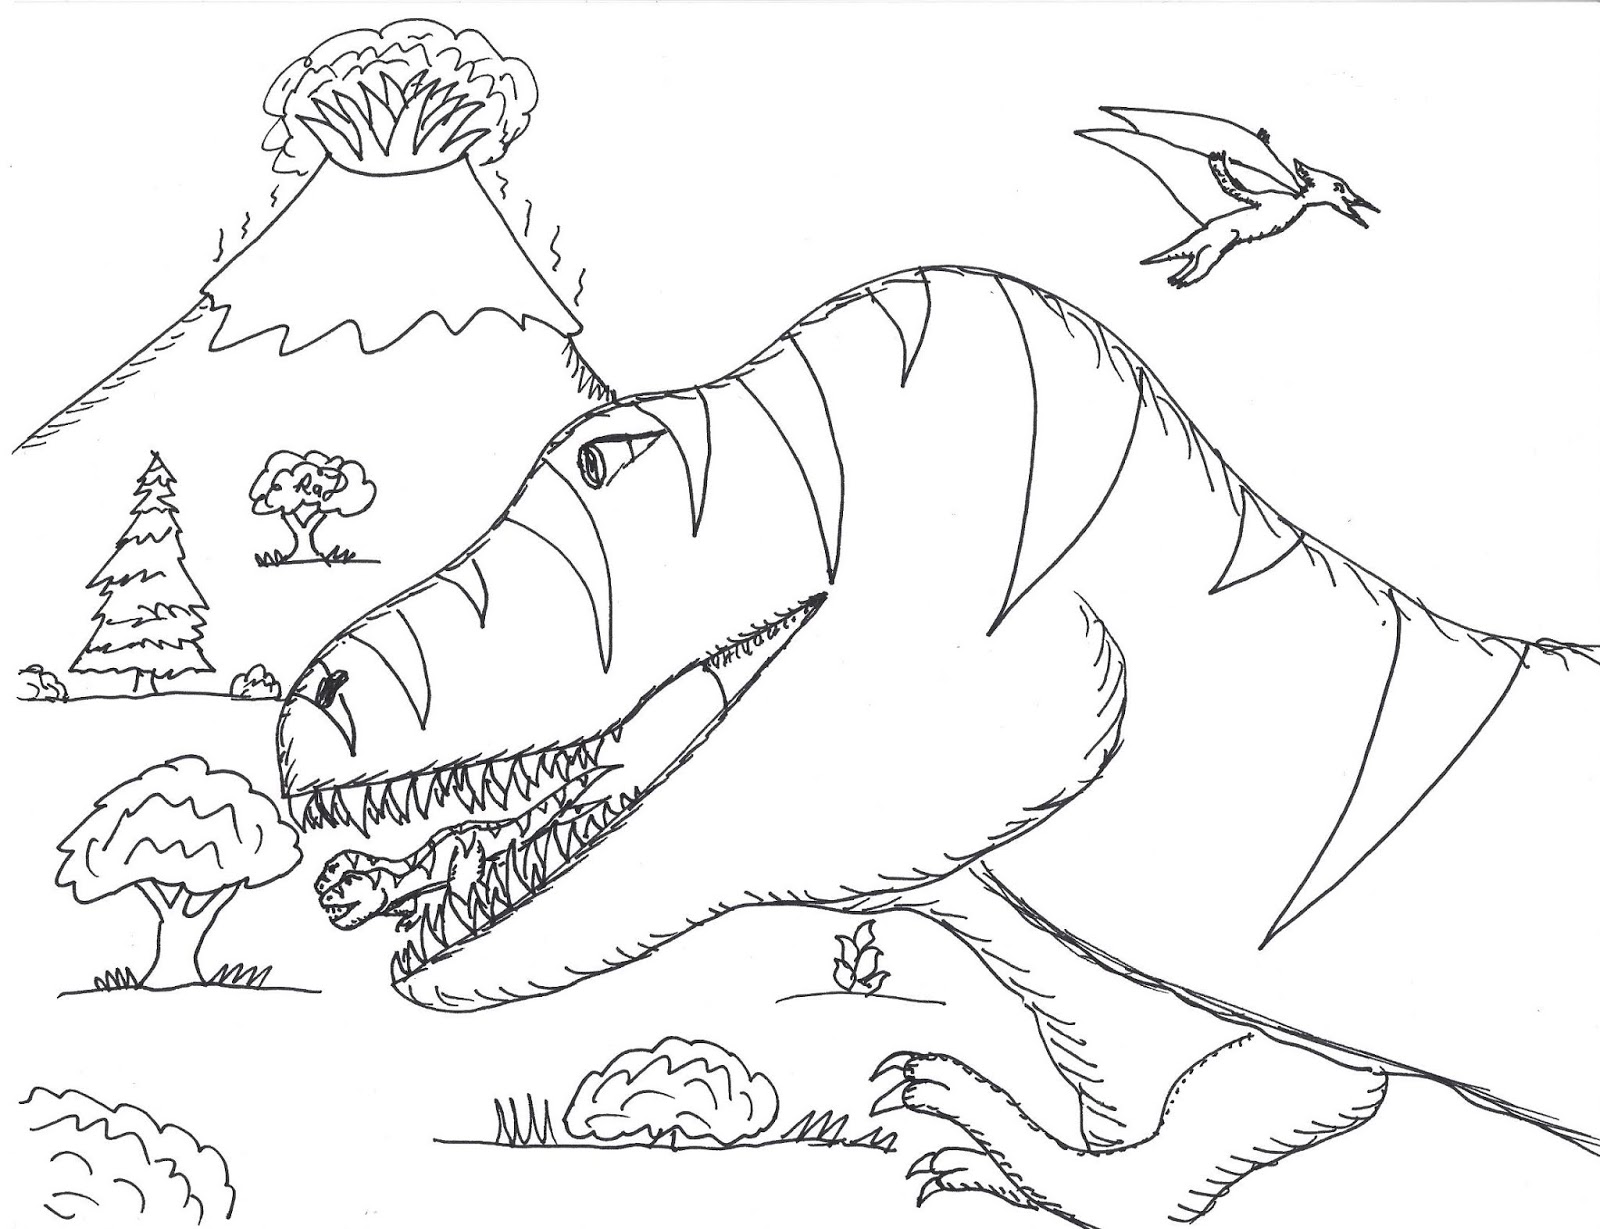 Robin's Great Coloring Pages: Tyrannosaurus rex and Triceratops ...